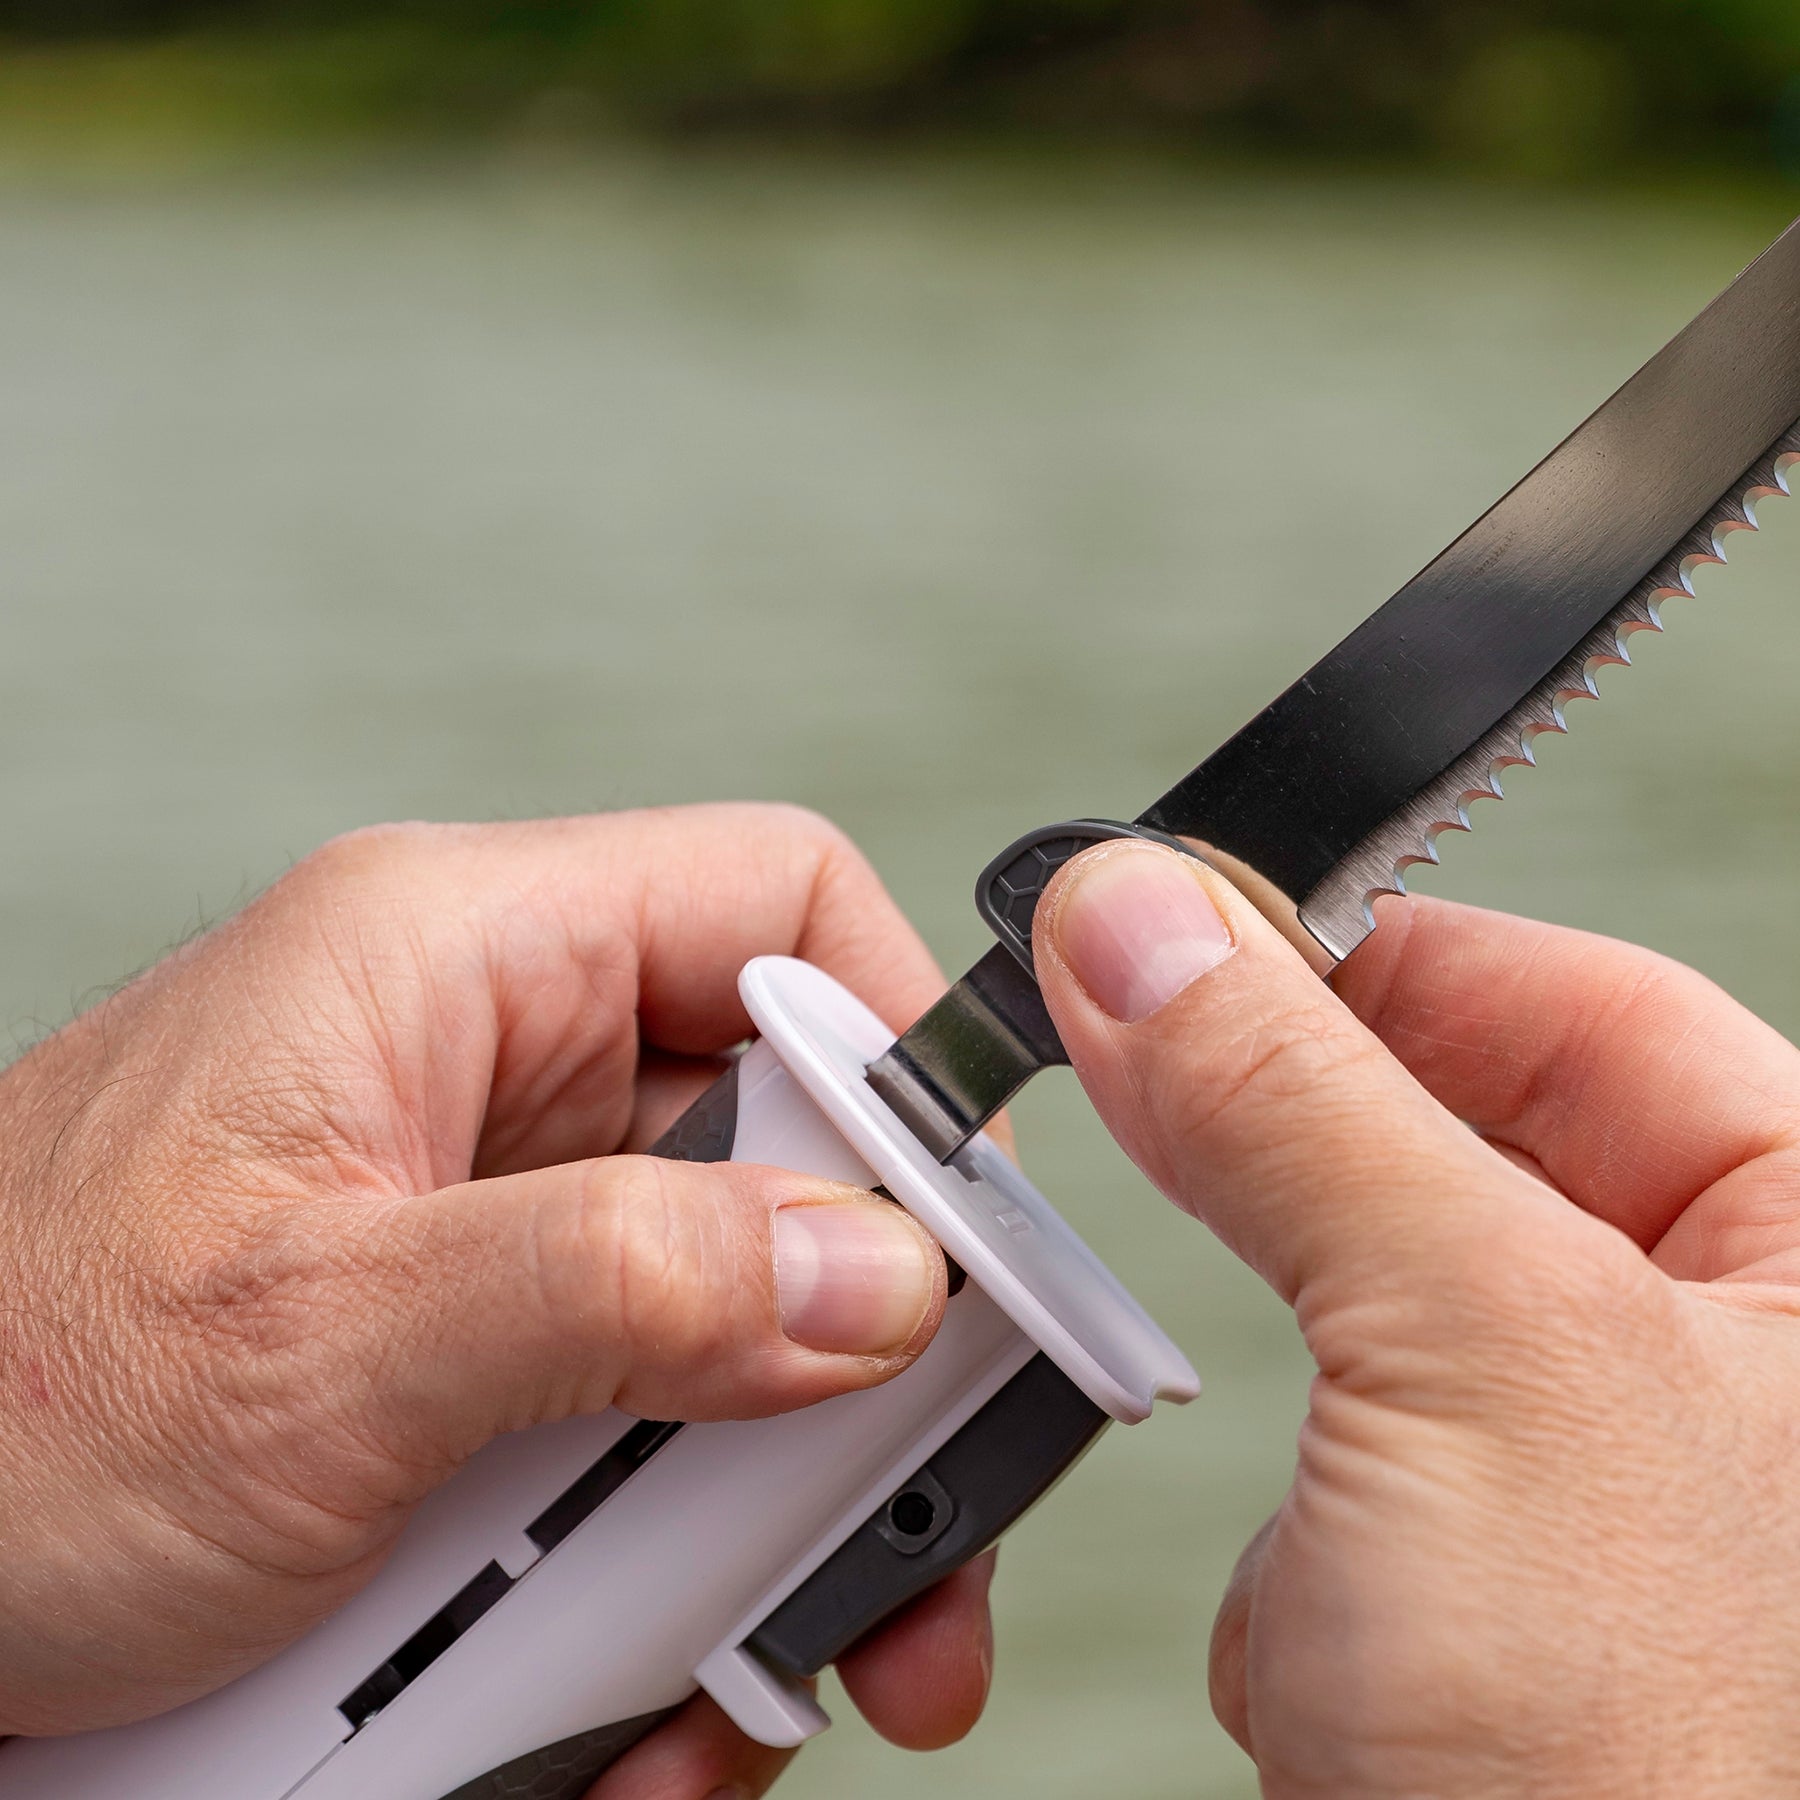 ELECTRIC FILLET KNIFE Fishing 2 Stainless Steel Serrated Blades